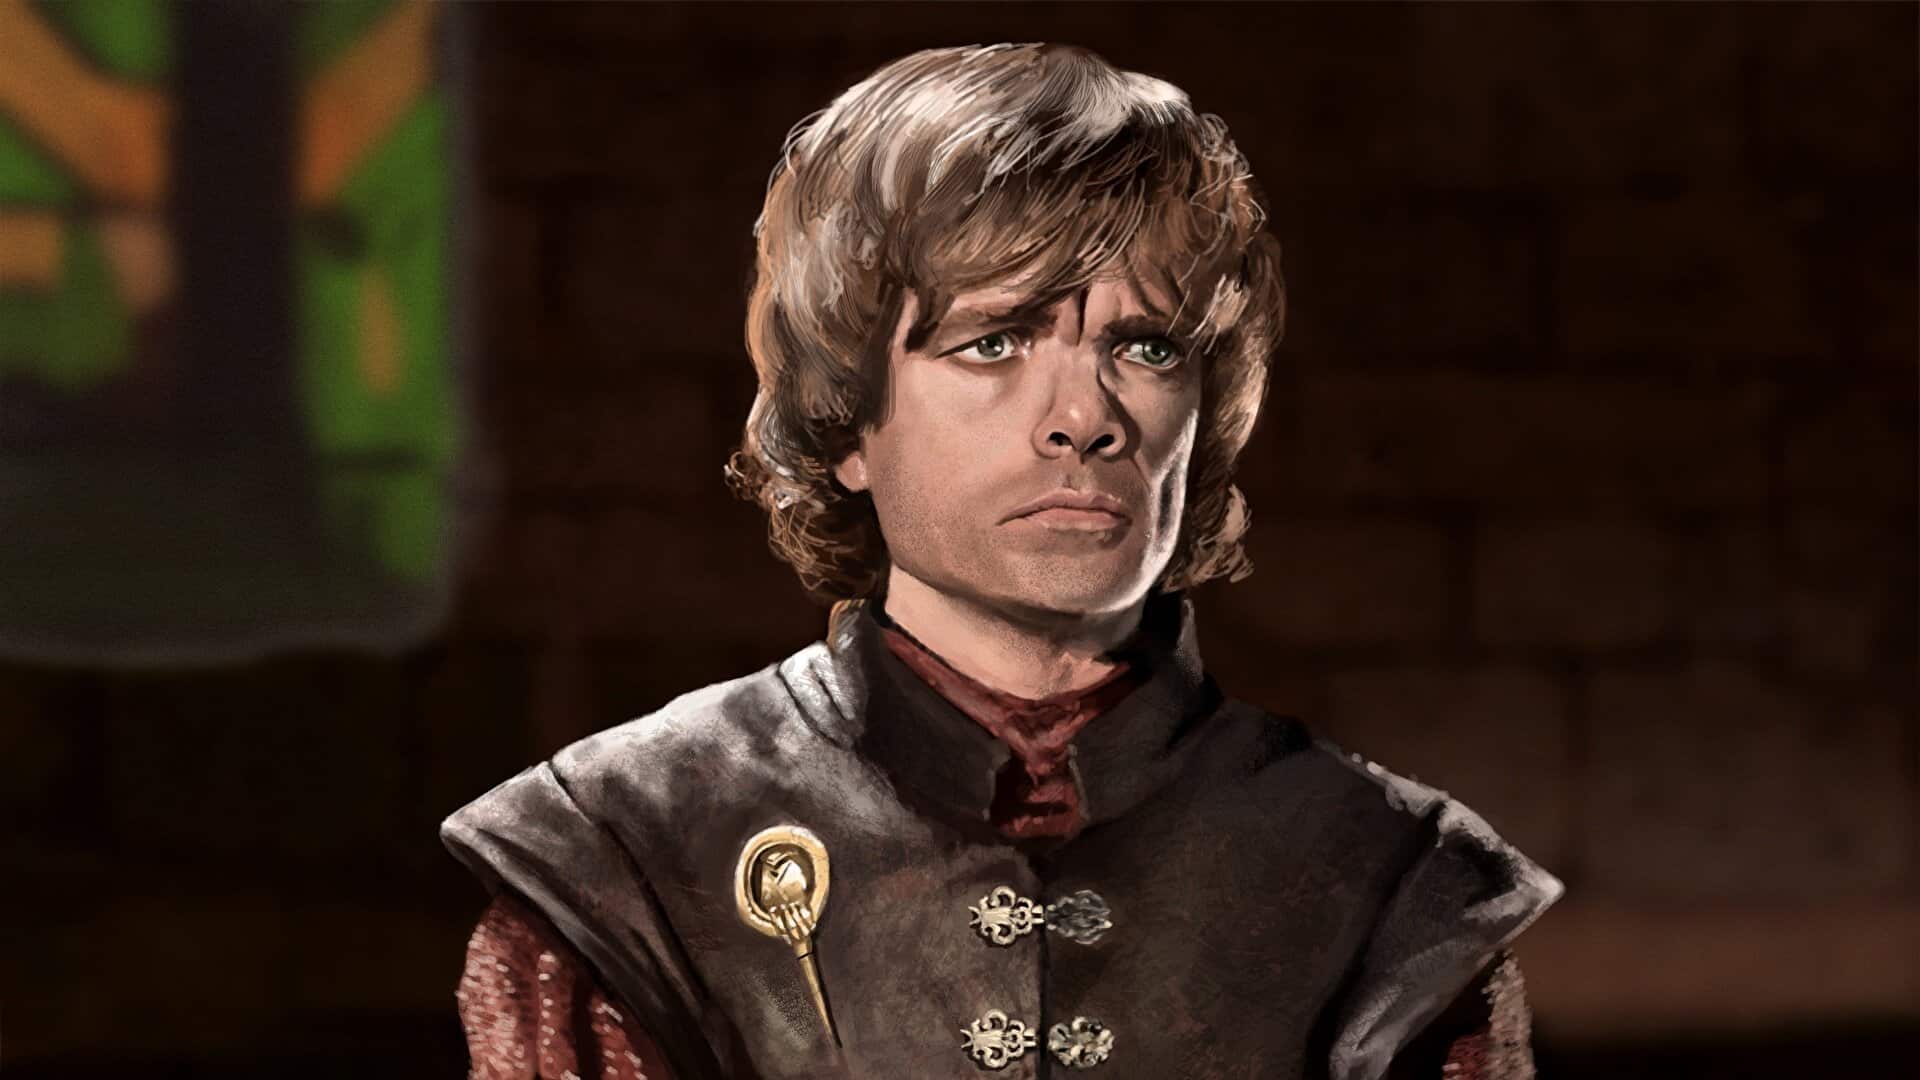 Tyrion Lannister without the beard